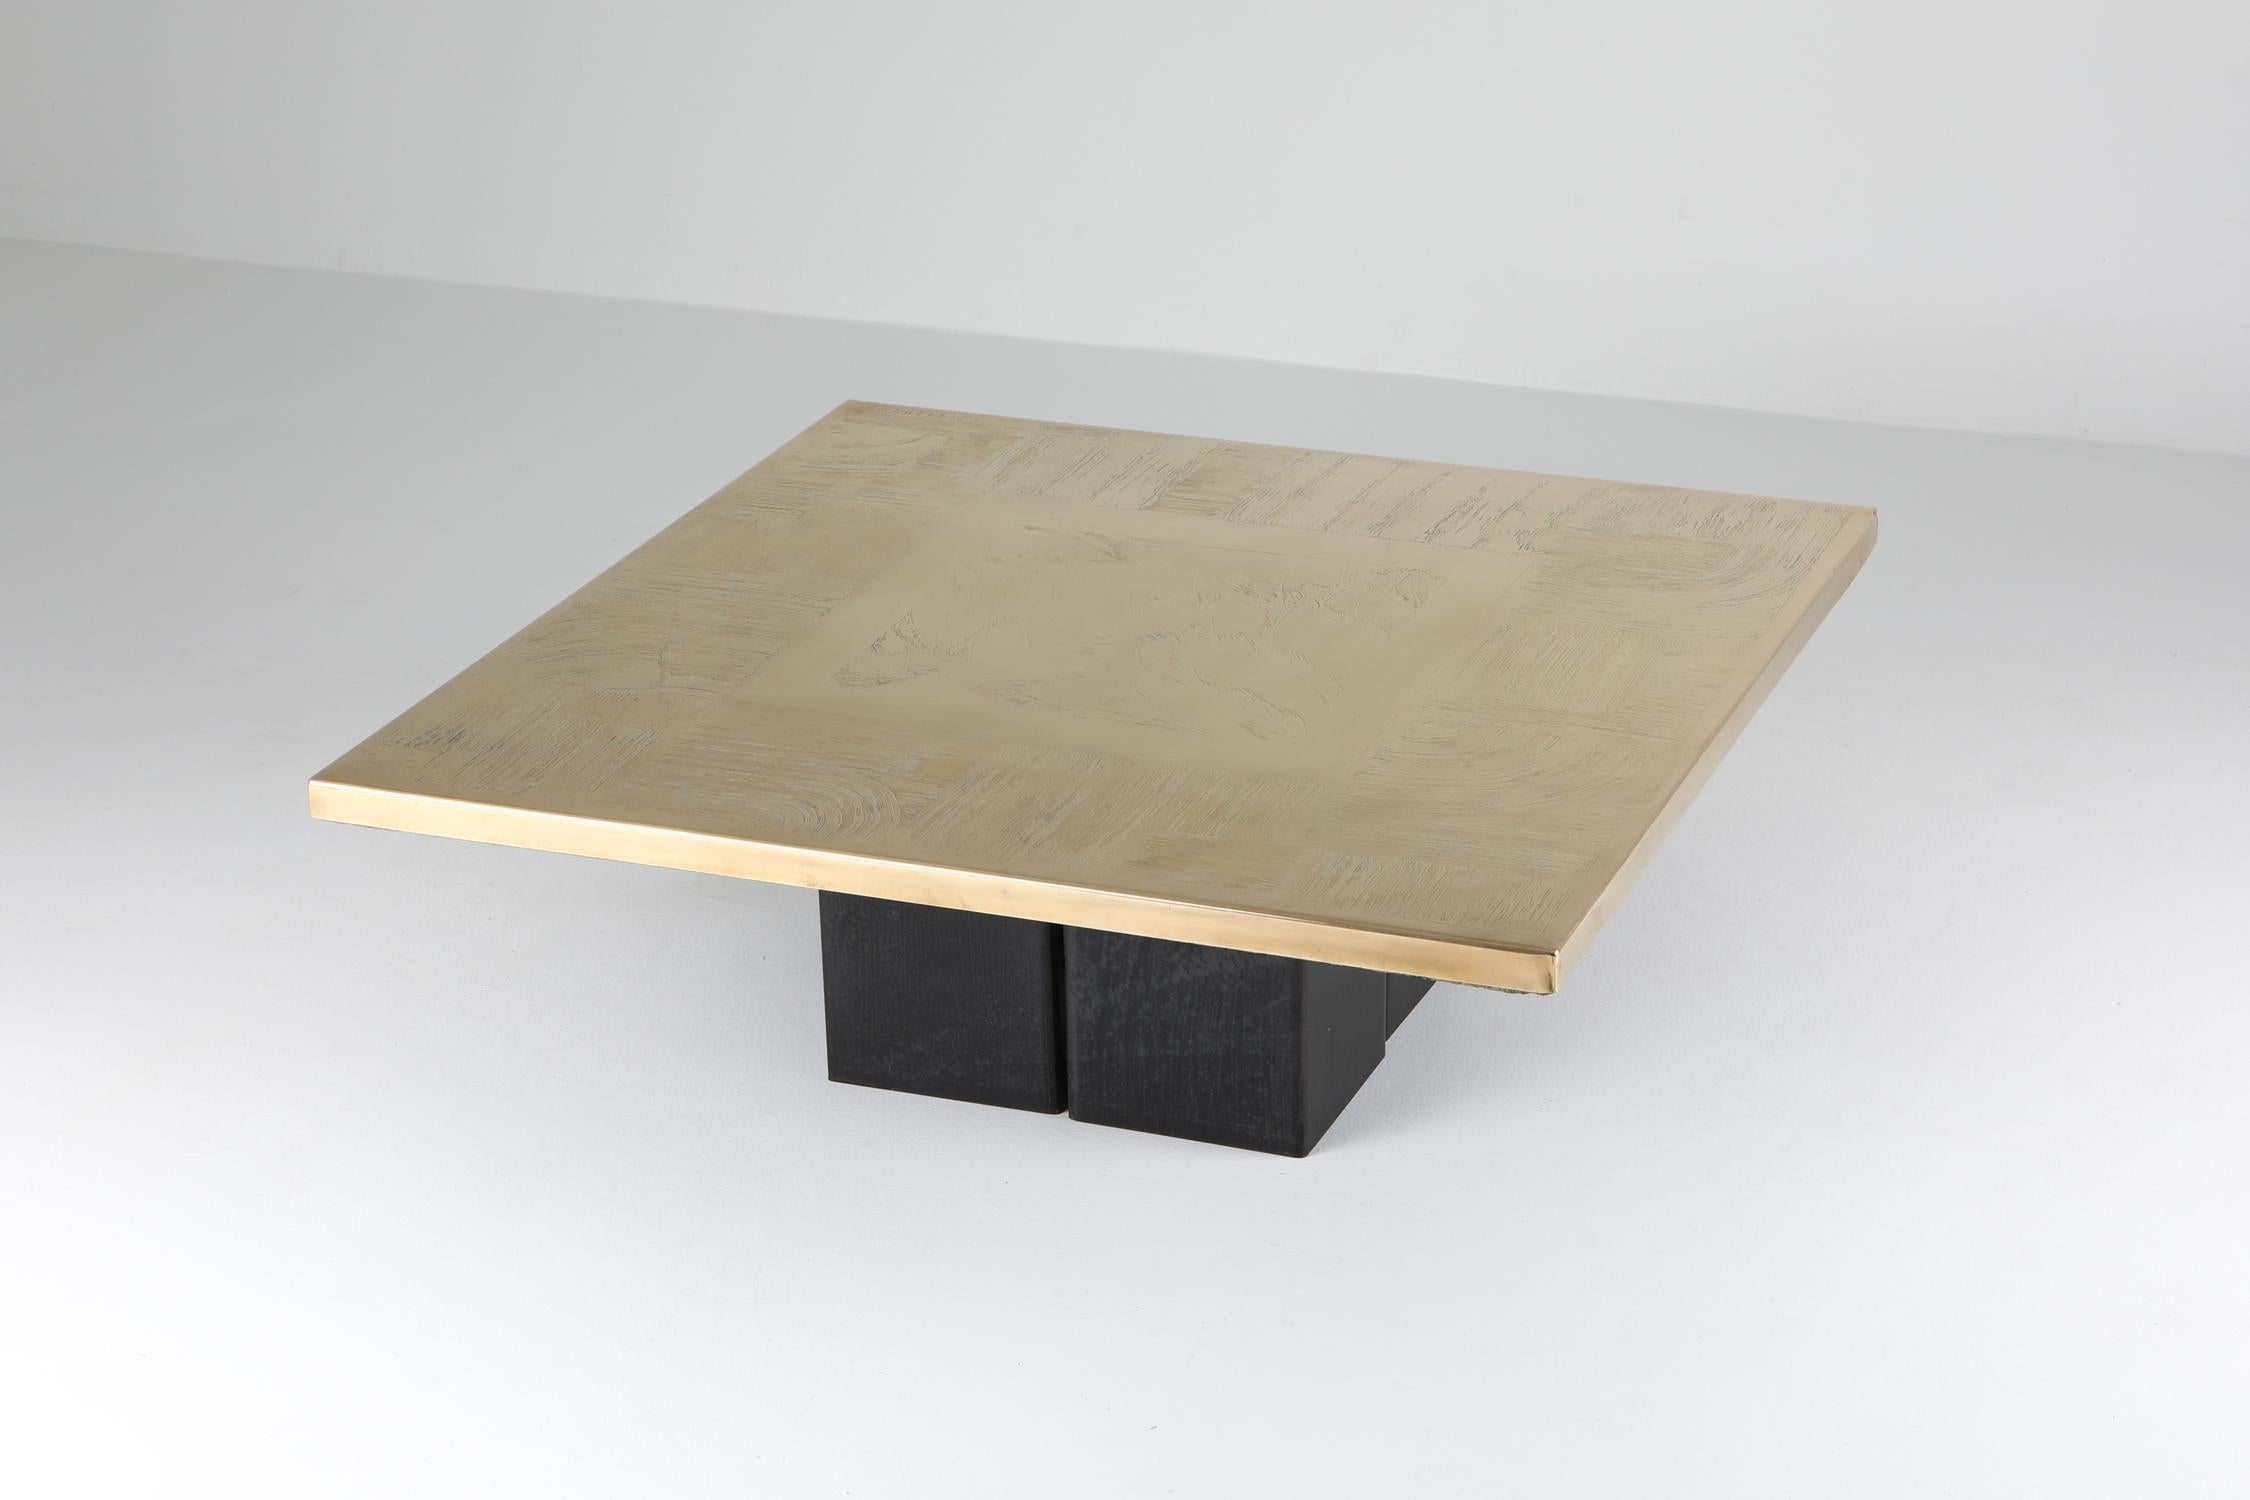 Brass etched coffee table by Christian Heckscher, Belgium, 1970s.
This coffee table is part of a living room table set which includes another two side tables.

Educated as a fine artist and meticulous craftsman in Belgium, Heckscher has been